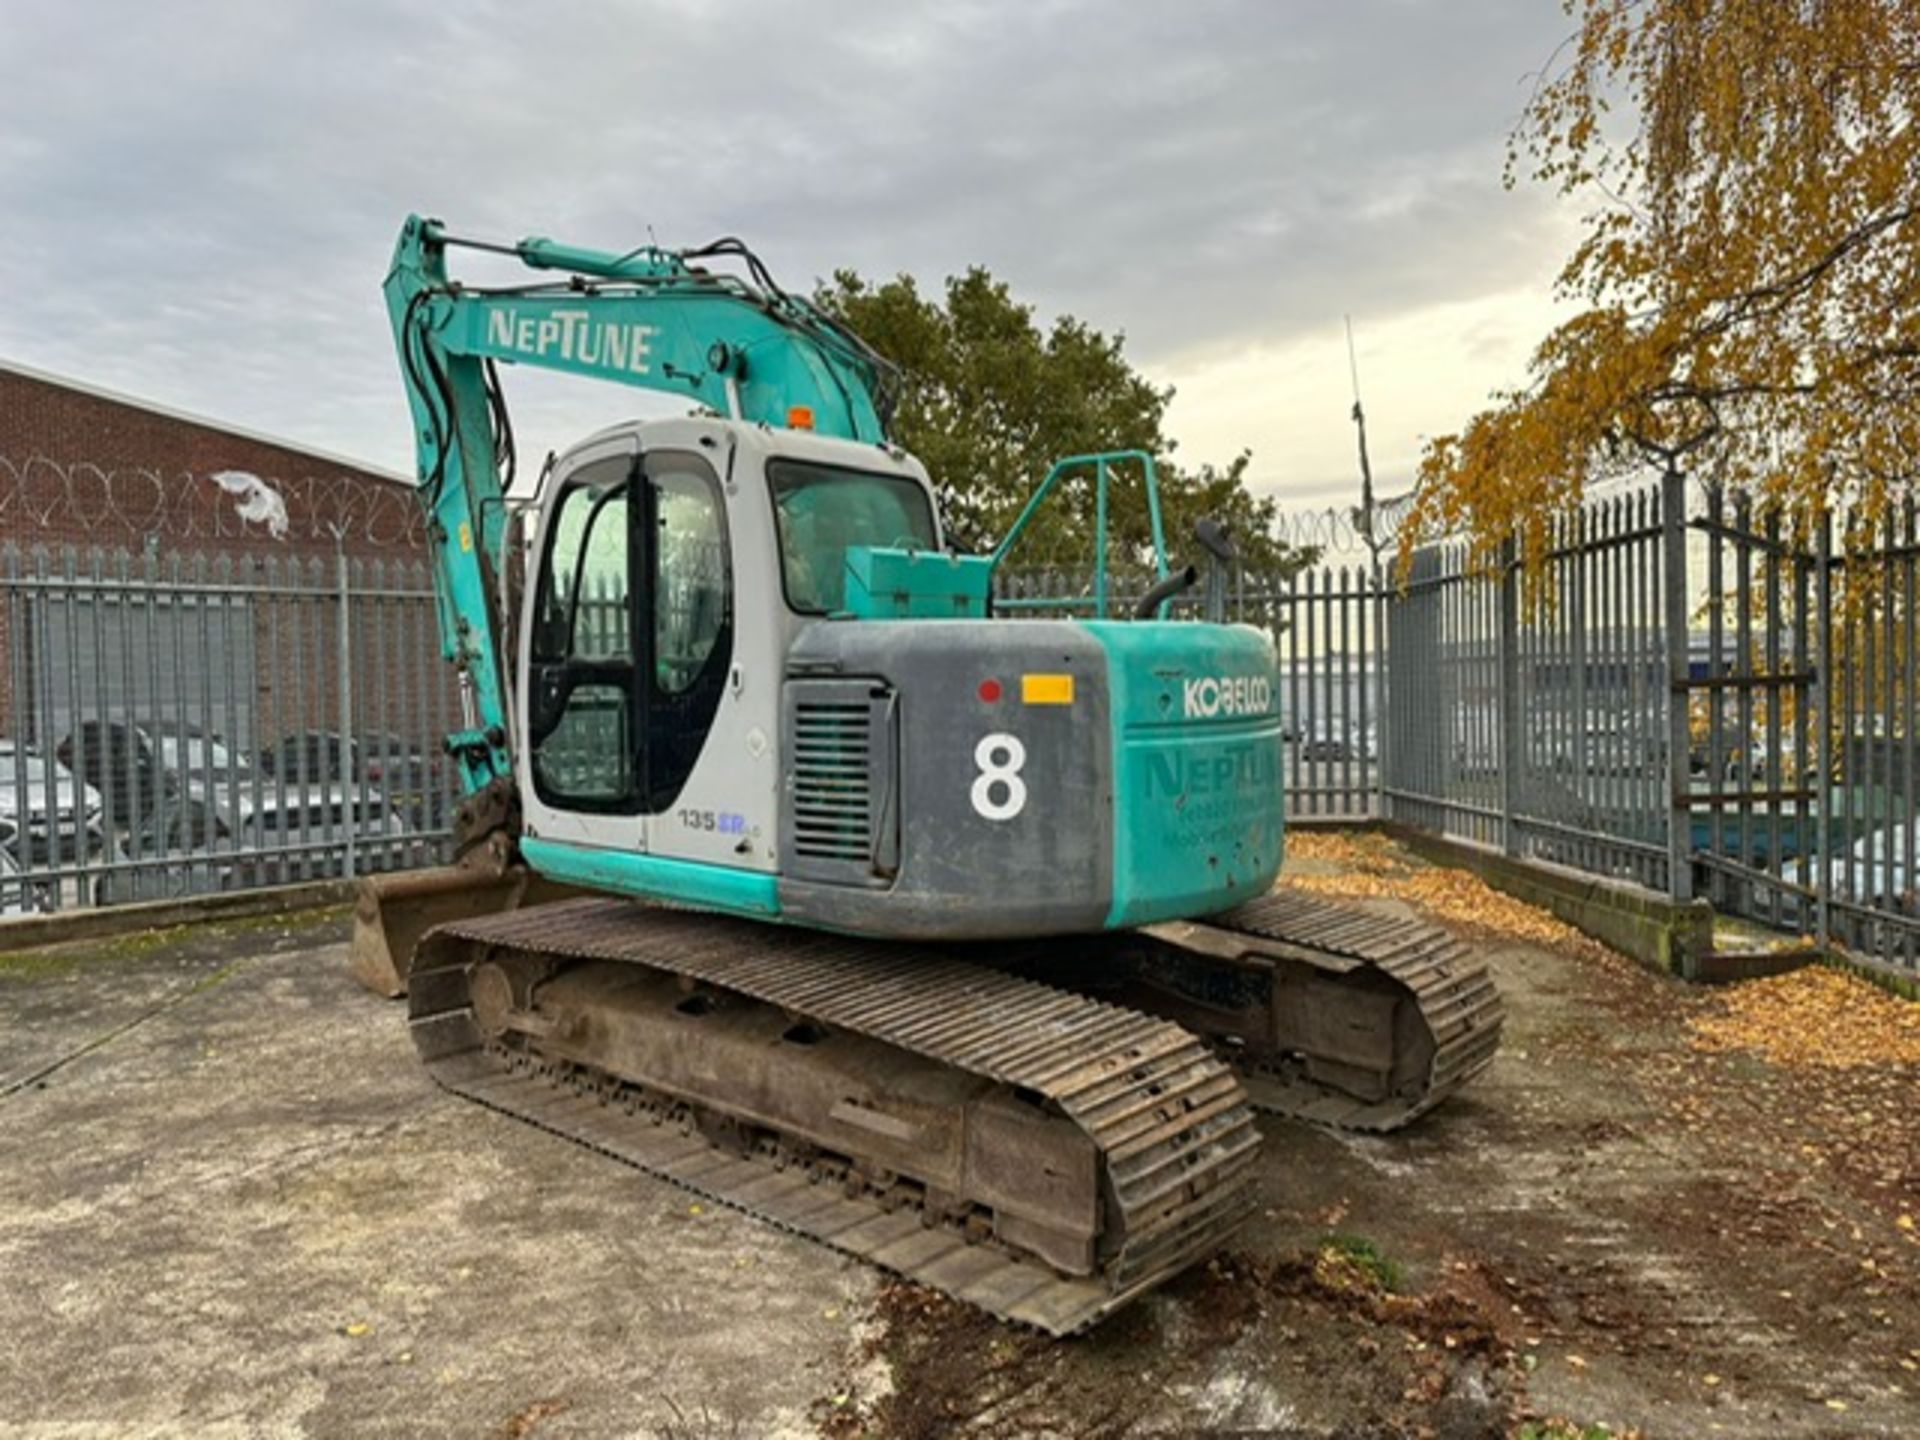 KOBELCO SK135SRLC STEEL TRACKED 14TONNE EXCAVATOR. YEAR 2004 BUILD. WITH ONE GRADING BUCKET AS SHOWN - Image 5 of 7